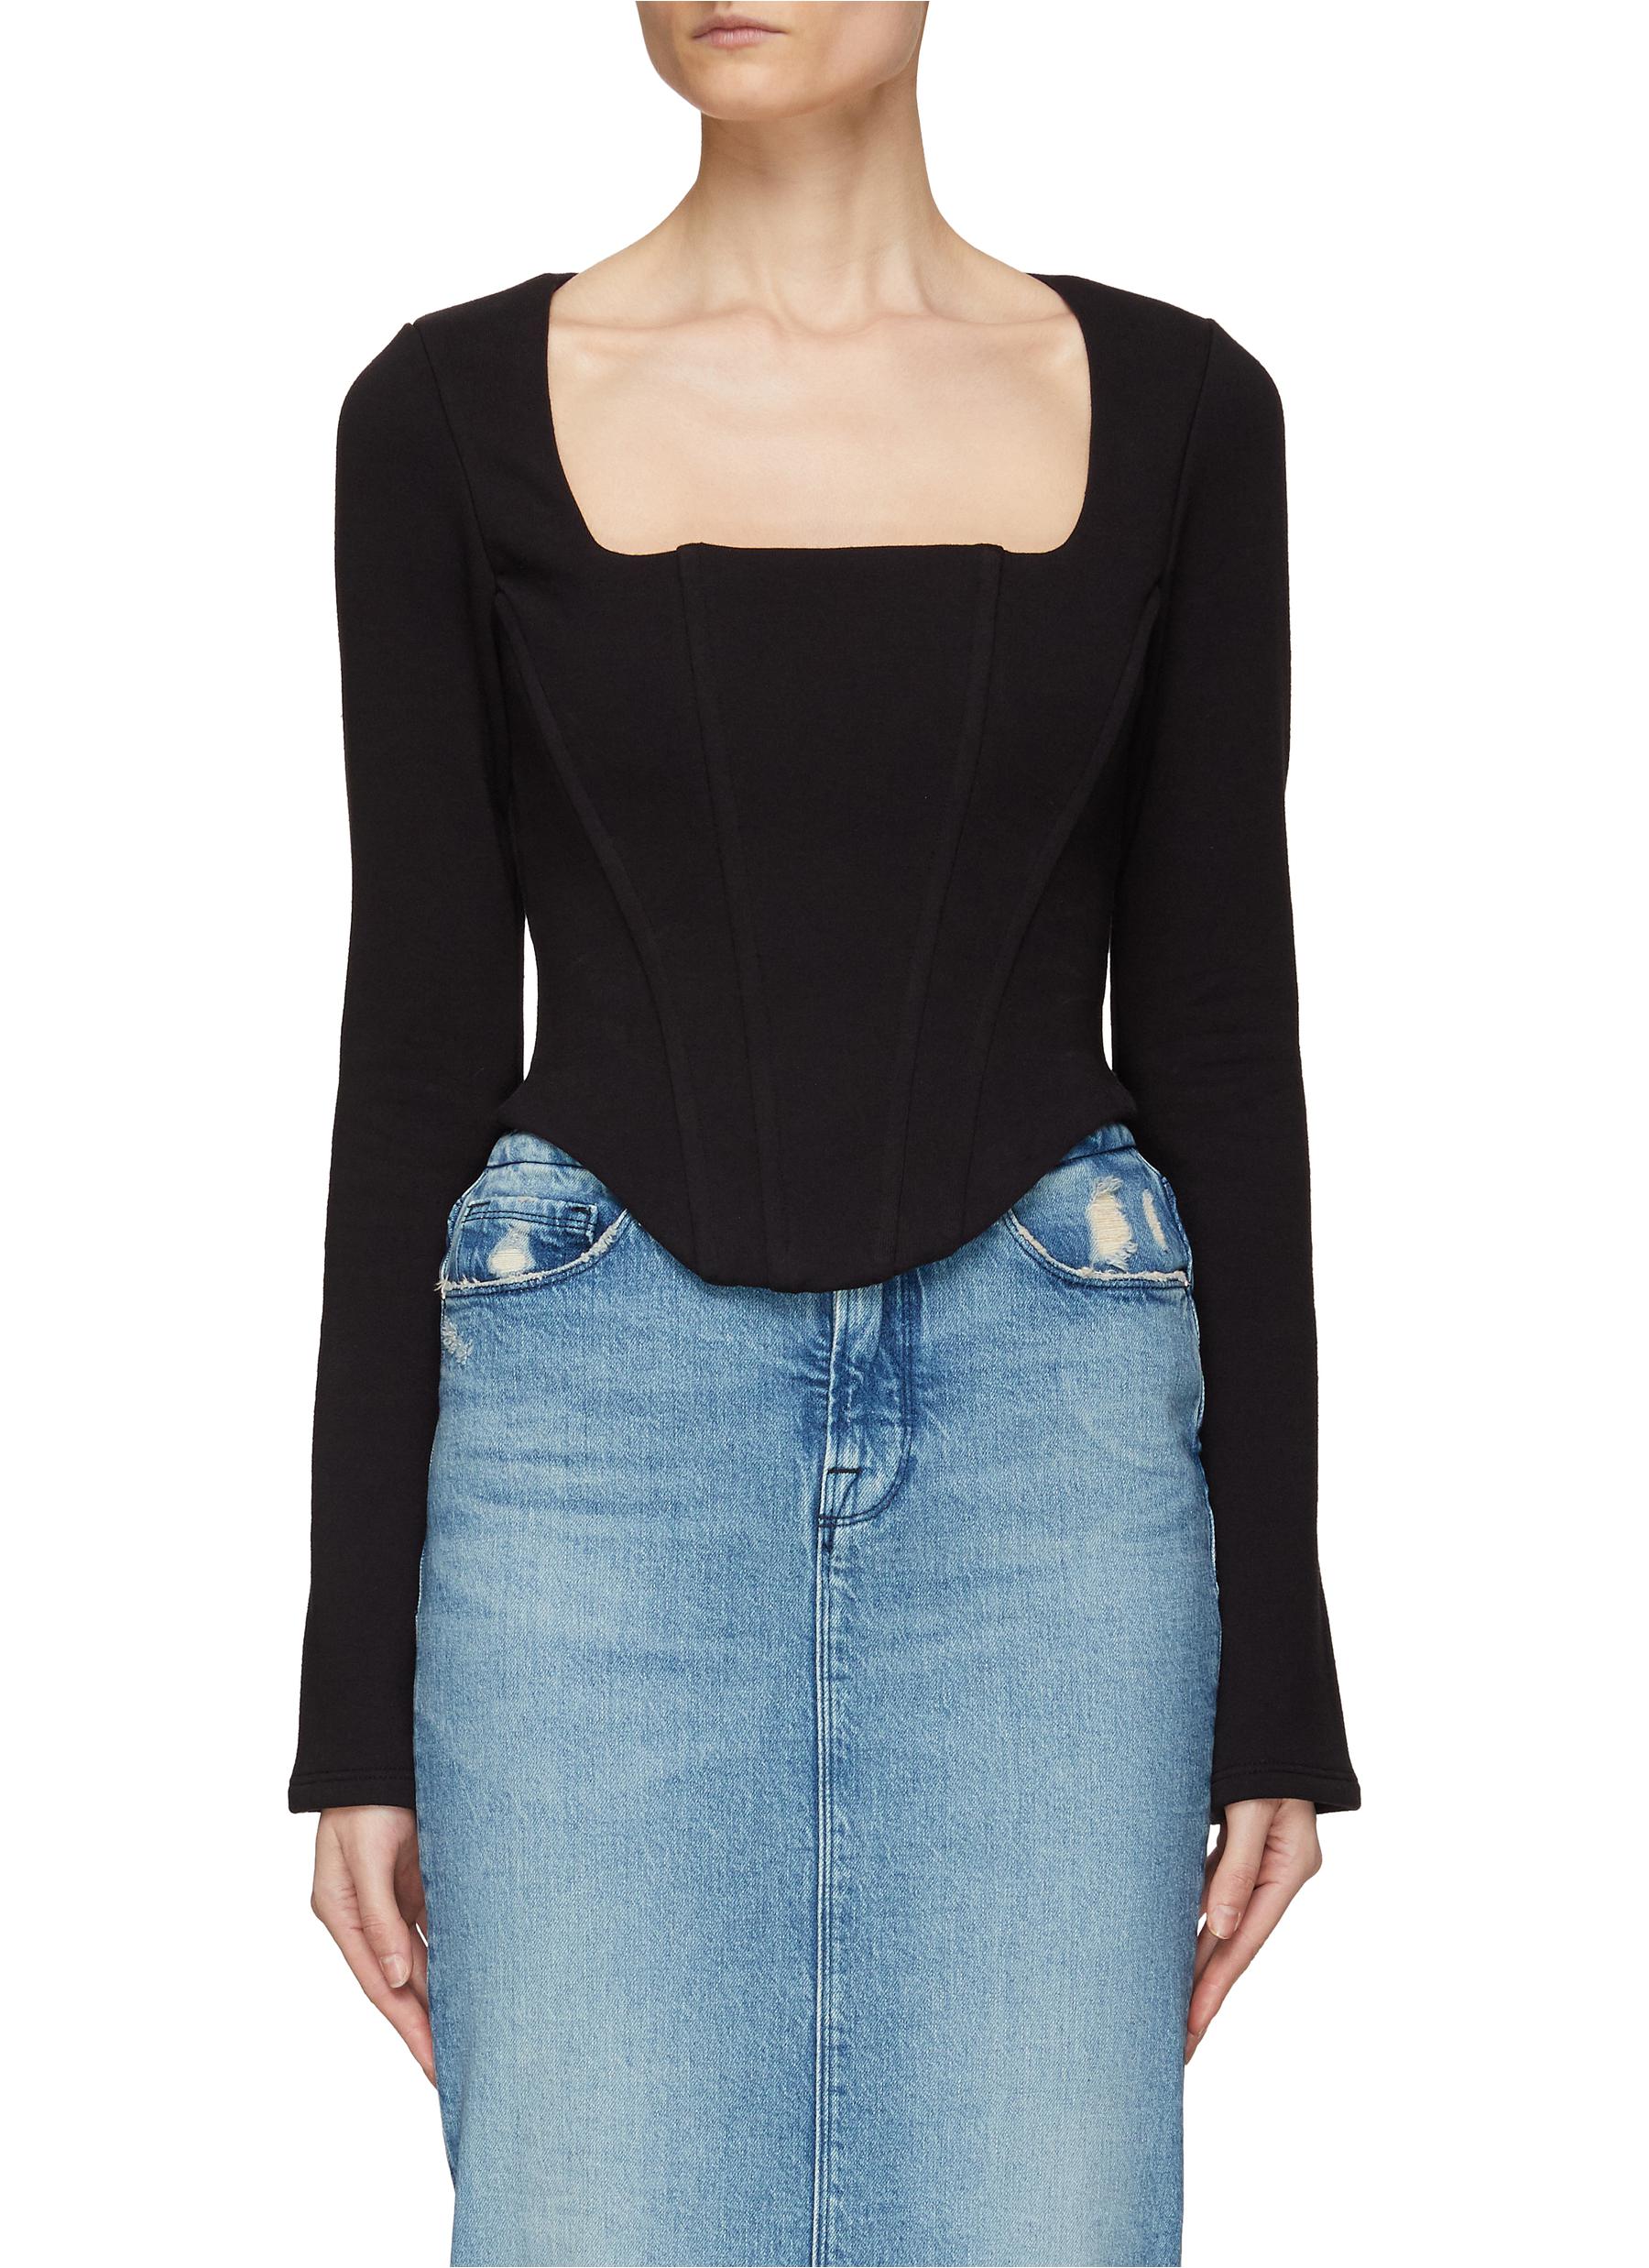 Square Neck Long Sleeve Corset Top